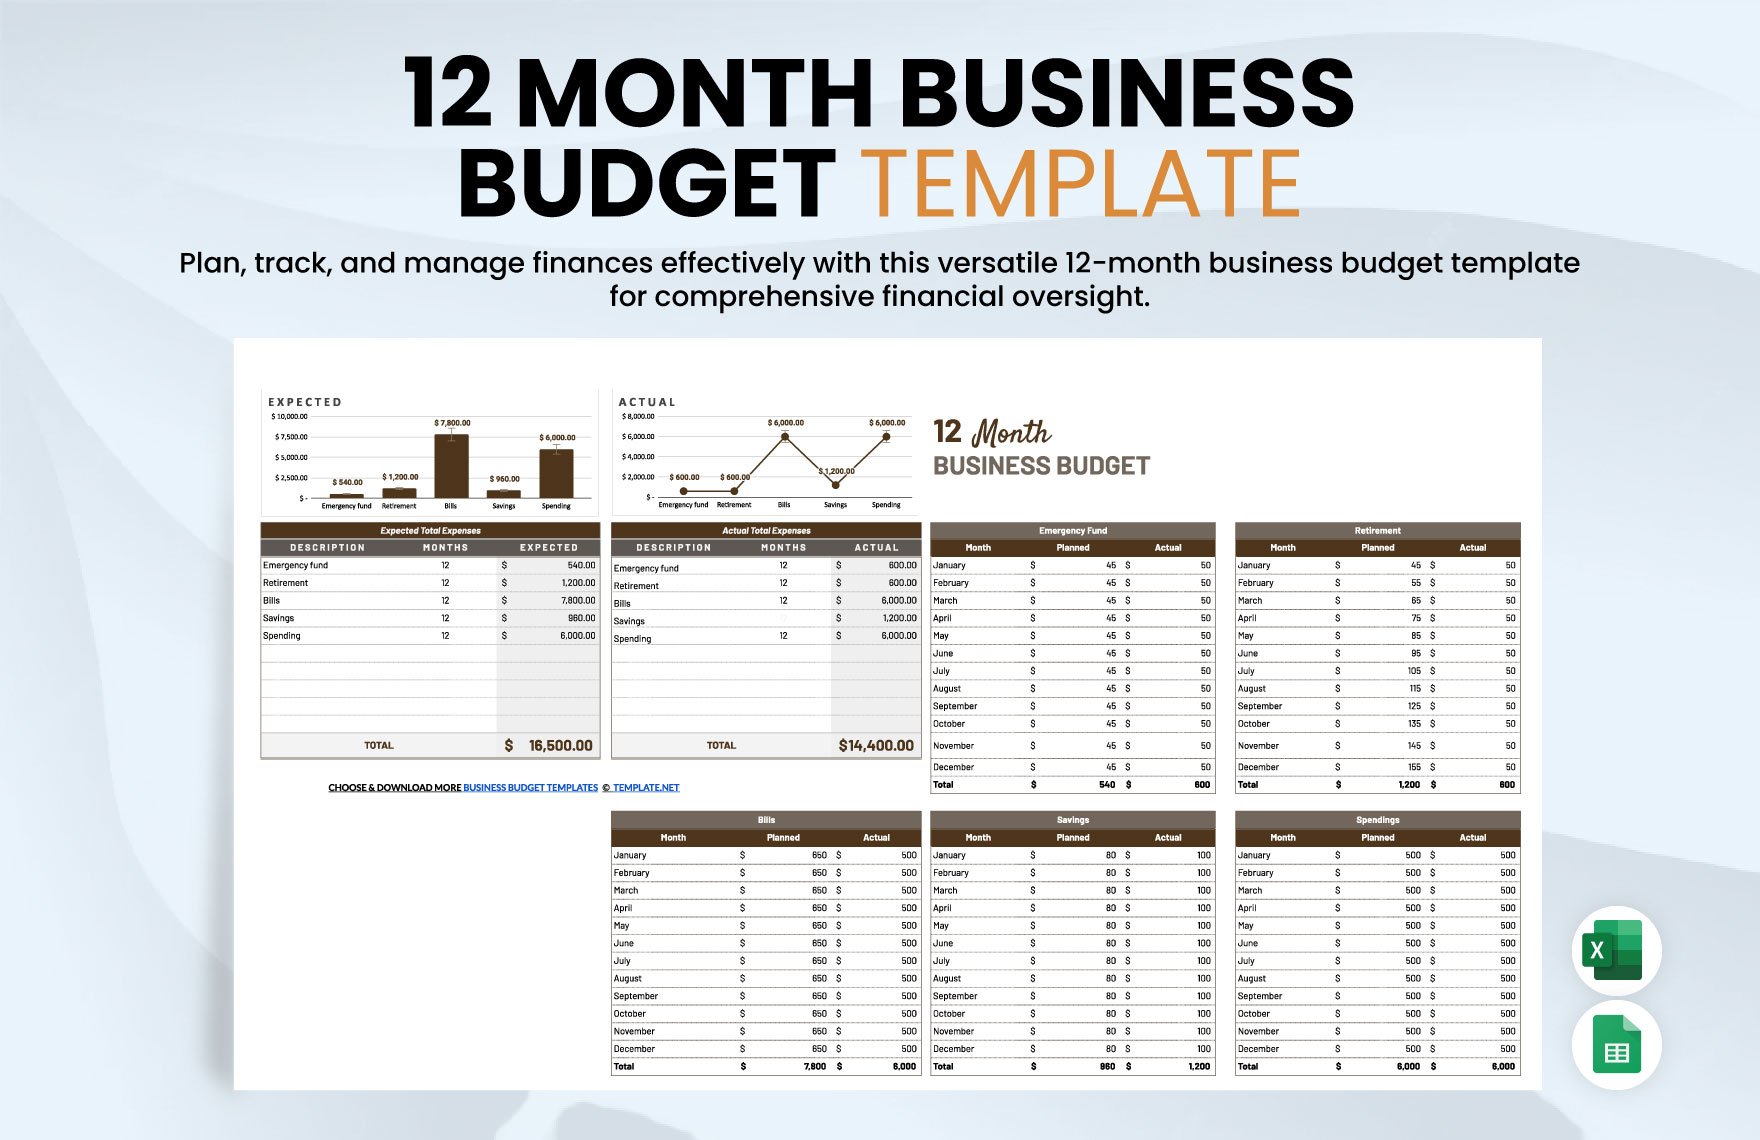 12 Month Business Budget Template in Excel, Google Sheets